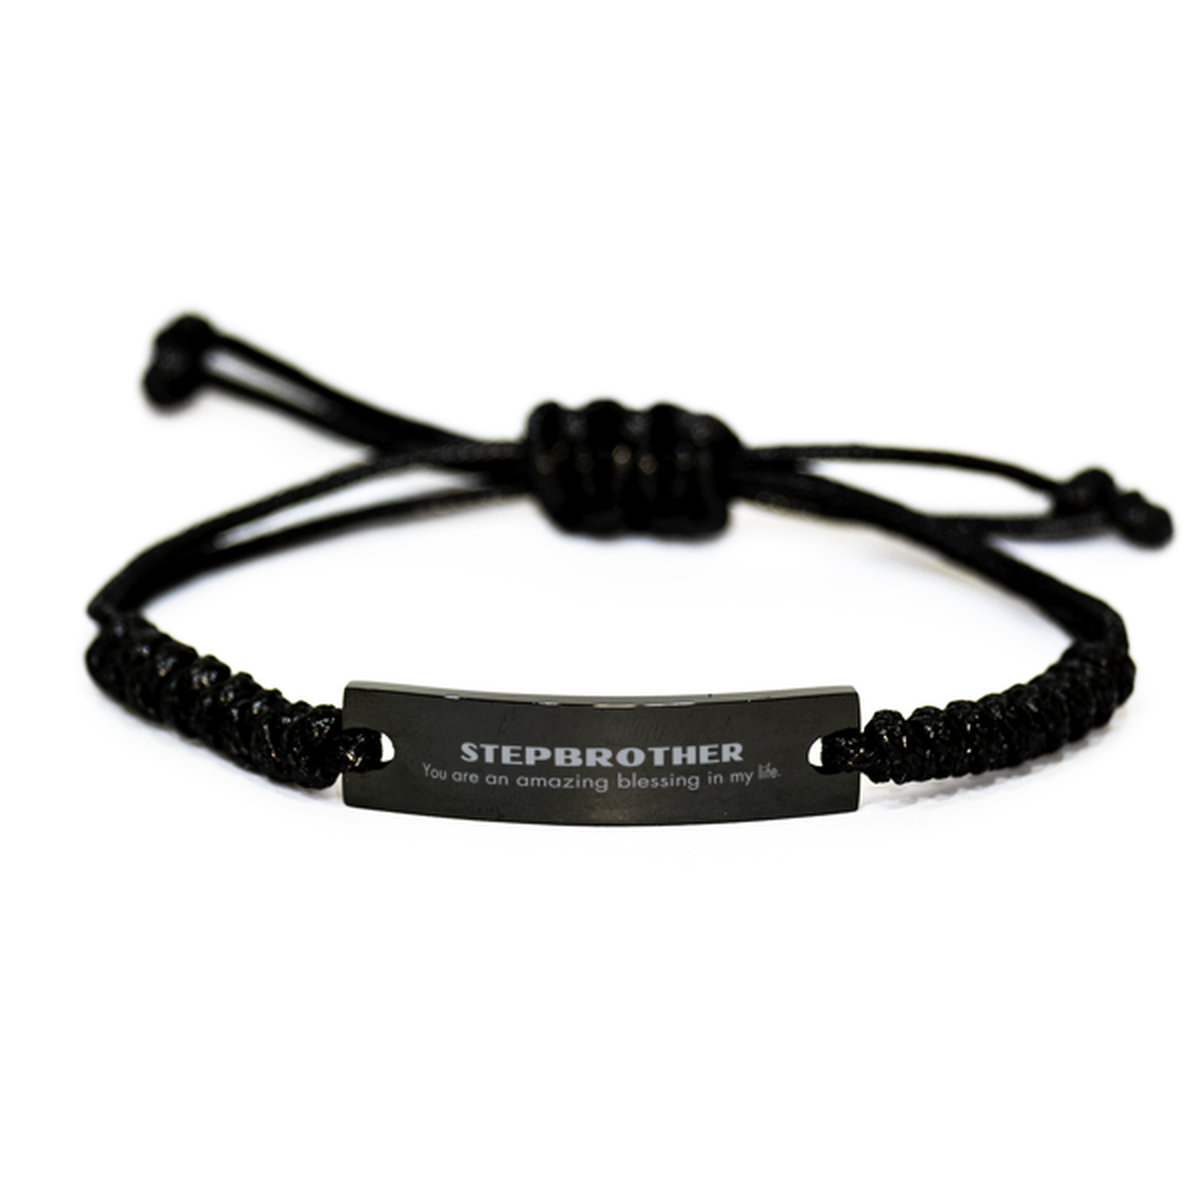 Stepbrother Black Rope Bracelet, You are an amazing blessing in my life, Thank You Gifts For Stepbrother, Inspirational Birthday Christmas Unique Gifts For Stepbrother